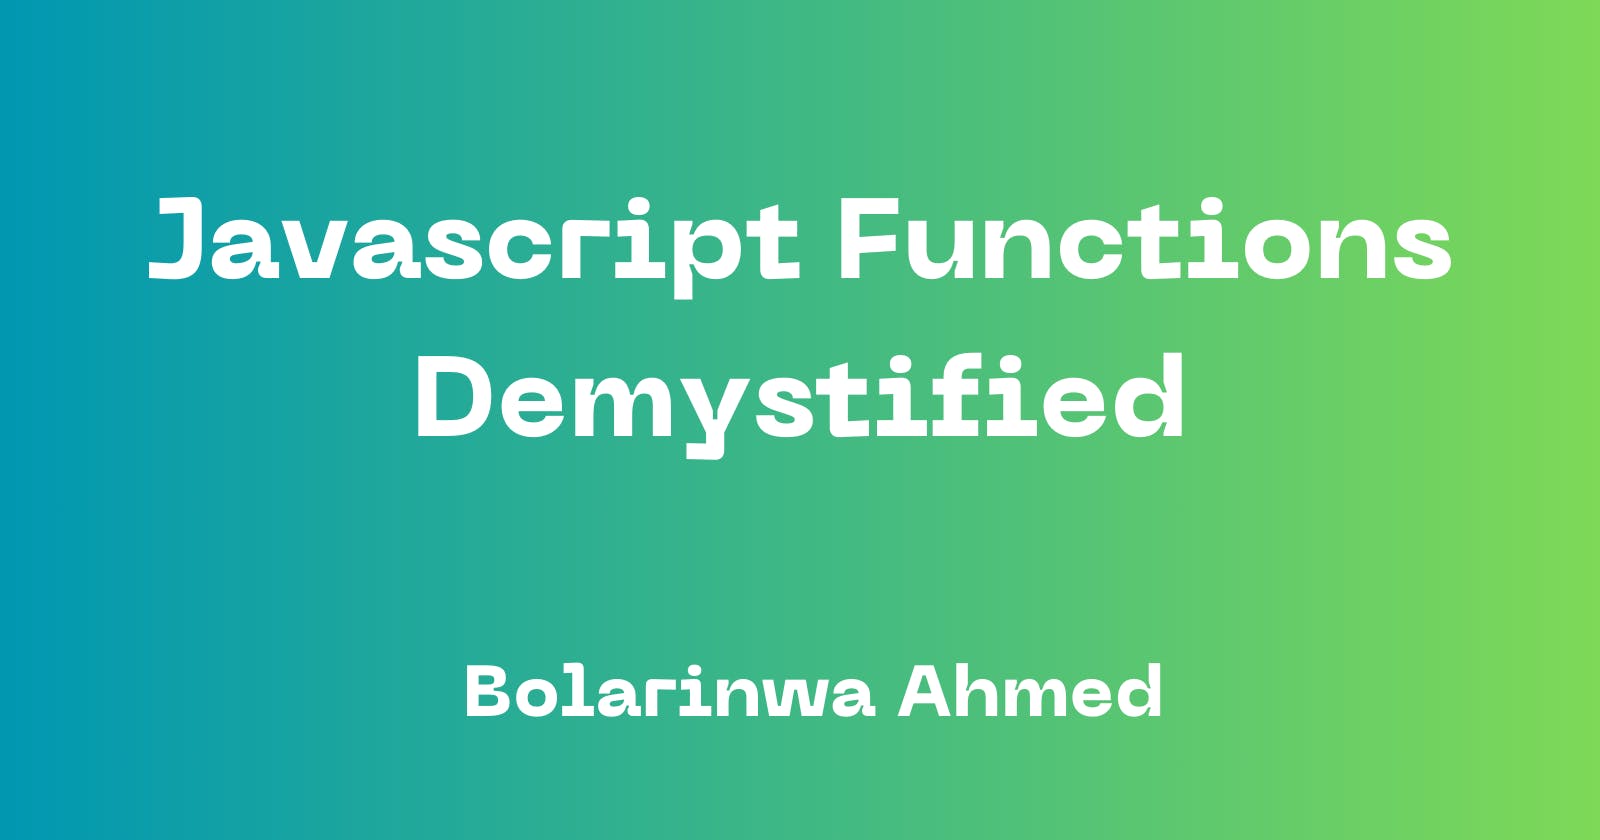 Javascript Functions Demystified - The Basics